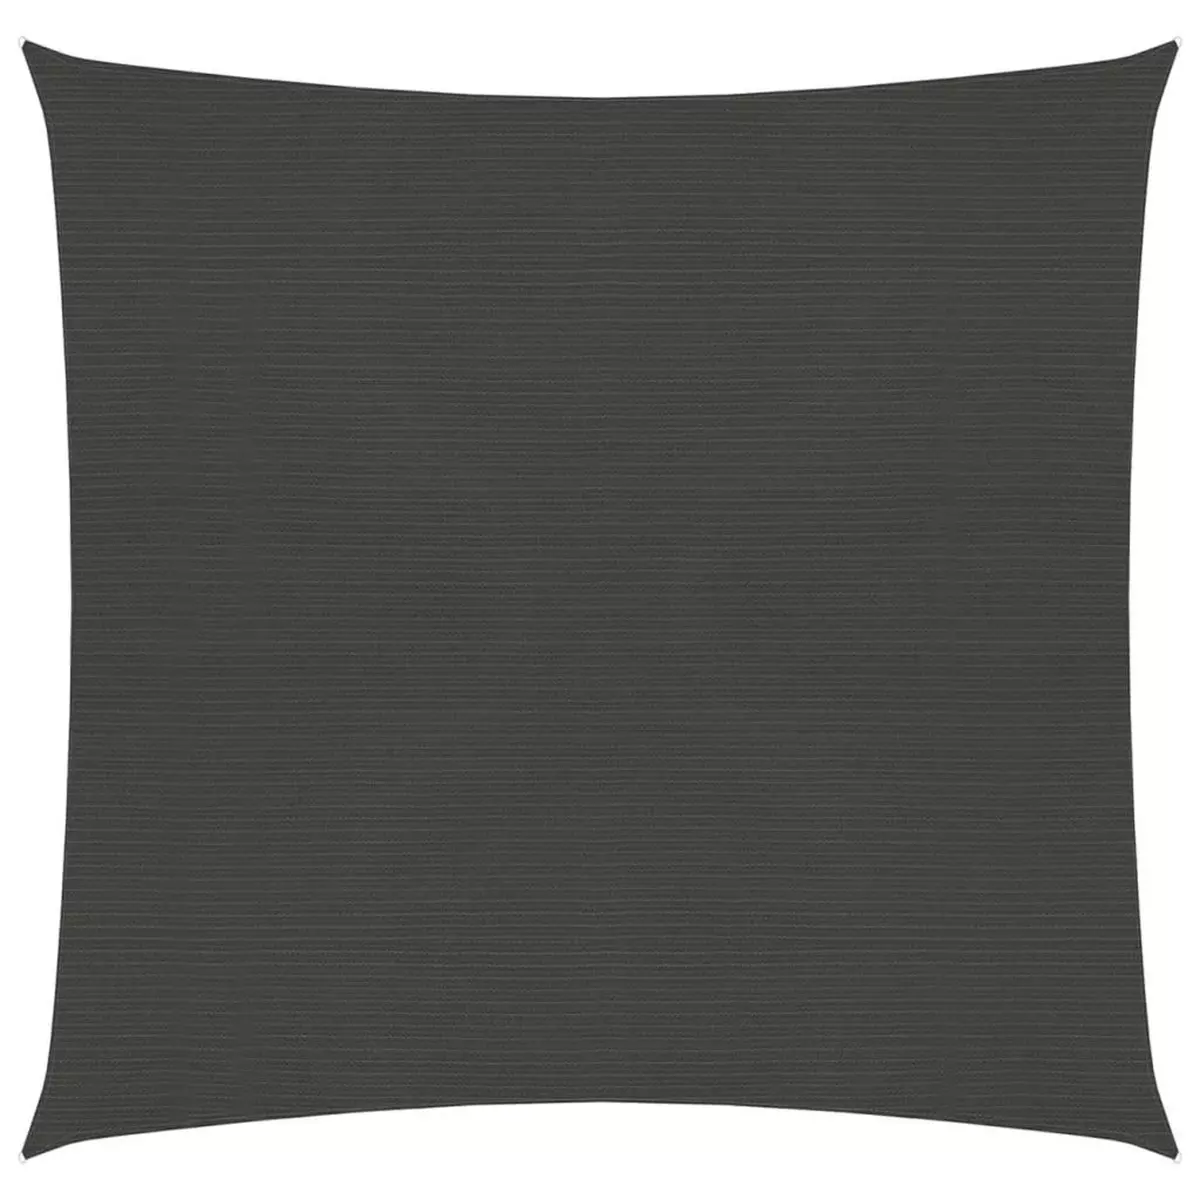 VIDAXL Voile d'ombrage 160 g/m^2 Anthracite 6x6 m PEHD